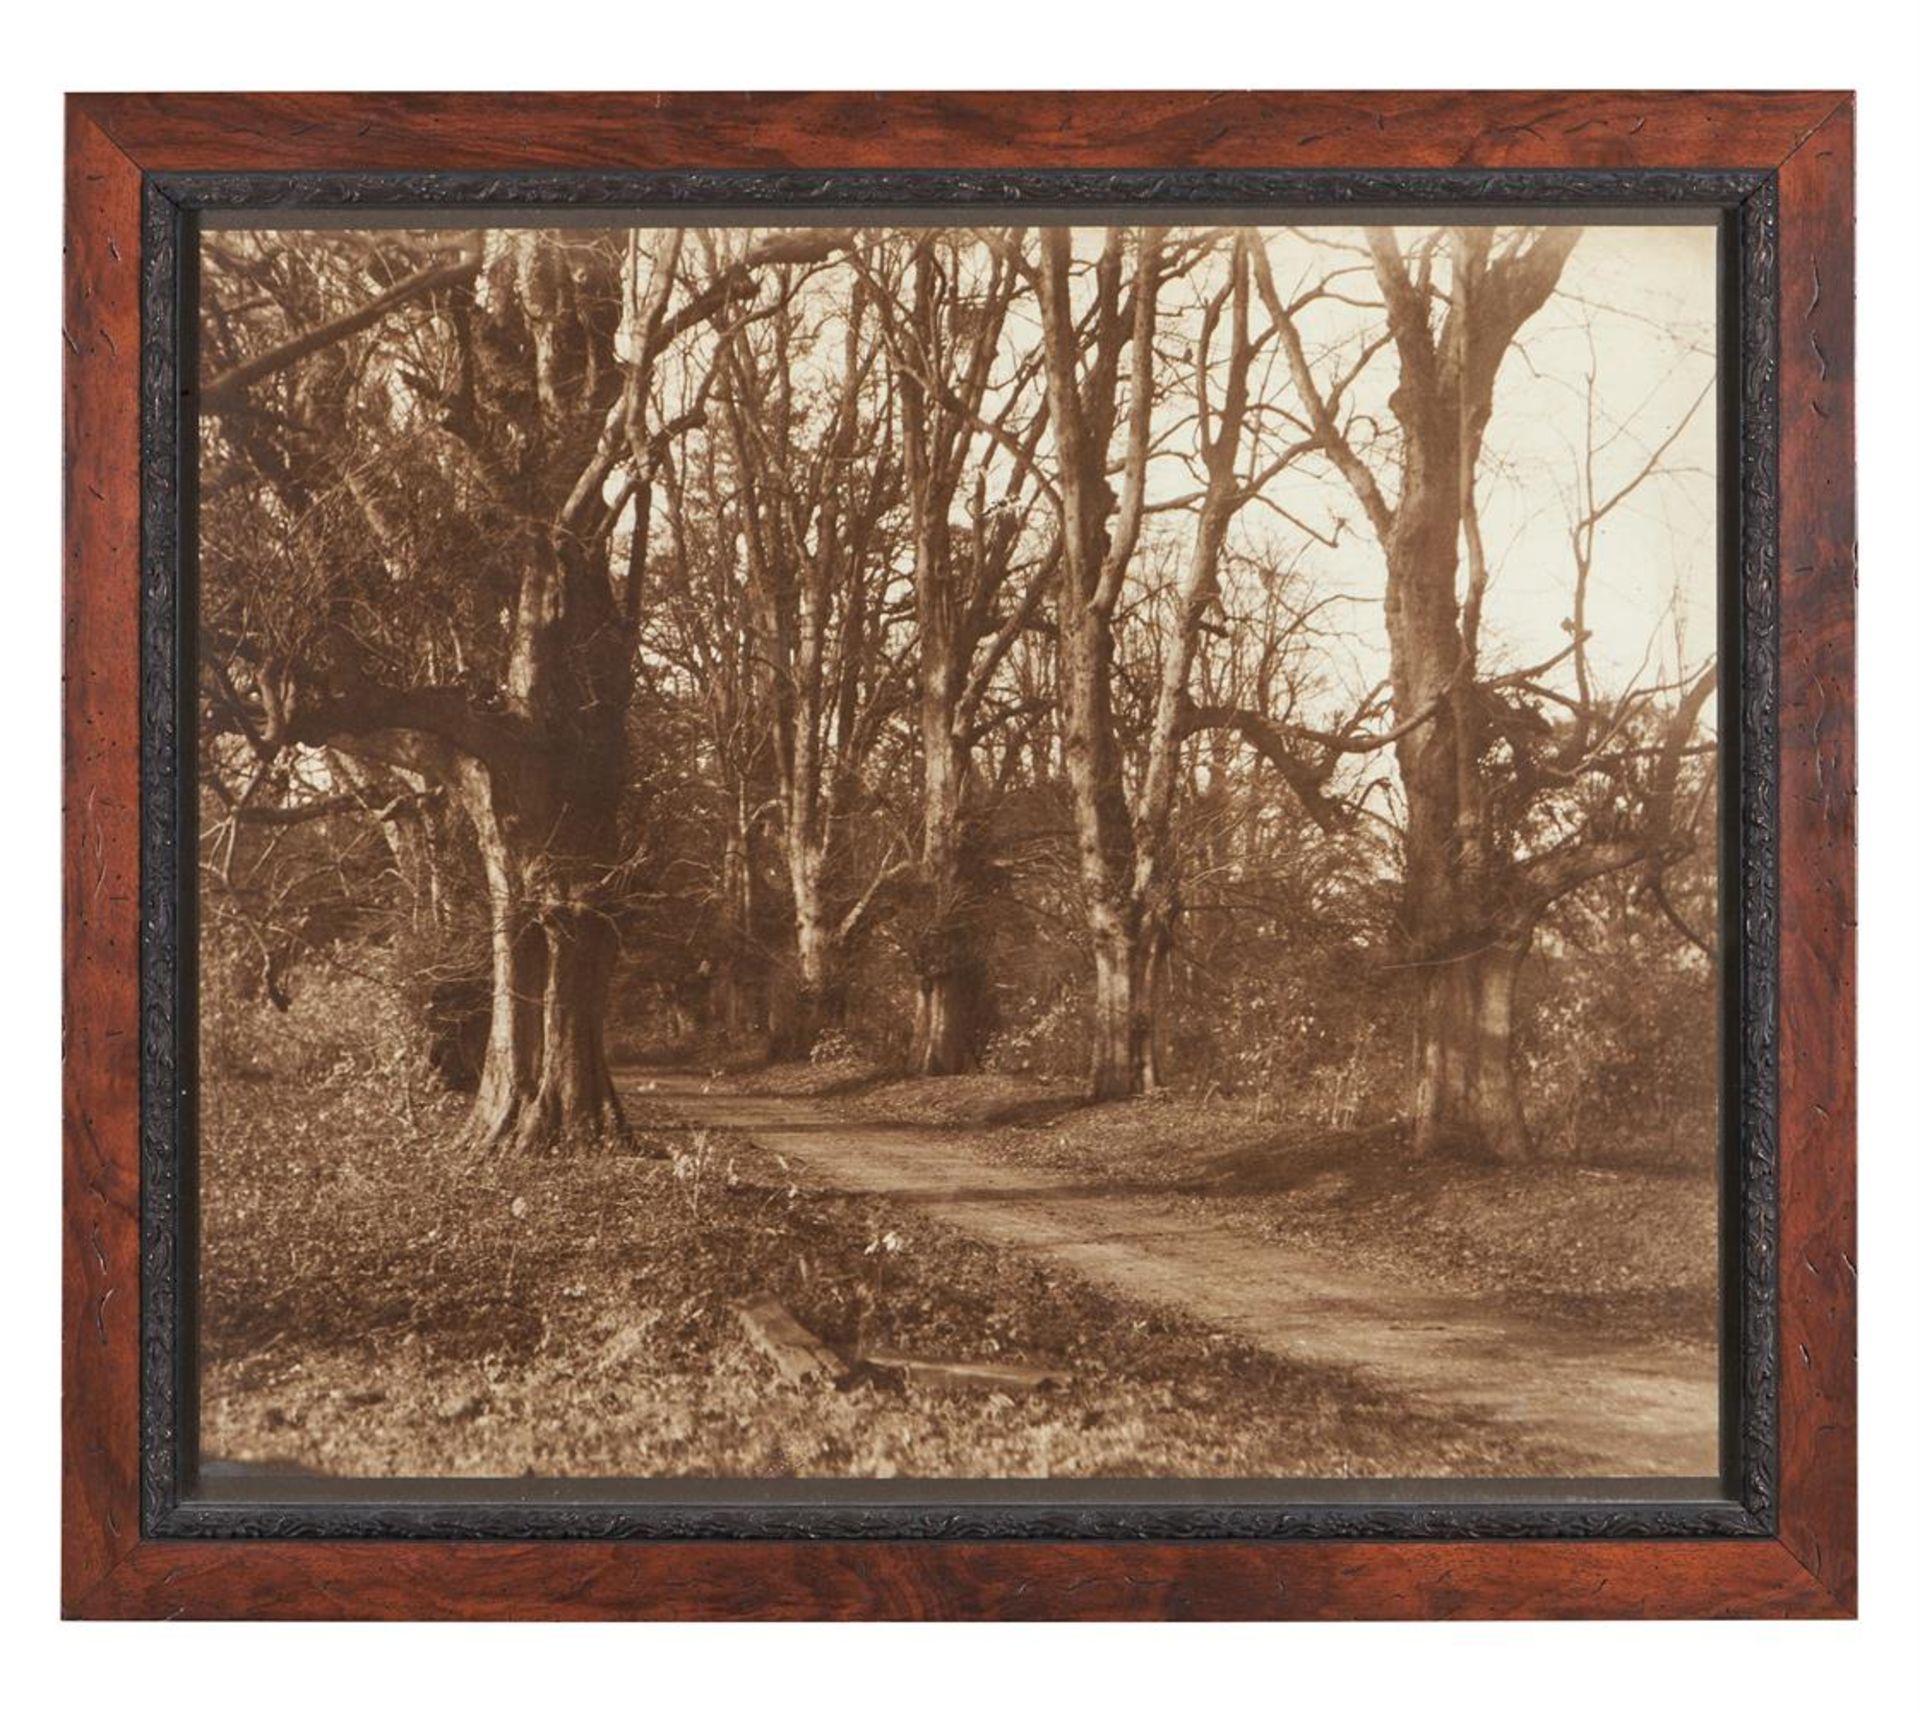 A SET OF THREE SEPIA PHOTOGRAPHIC PRINTS OF TREES - Image 5 of 6